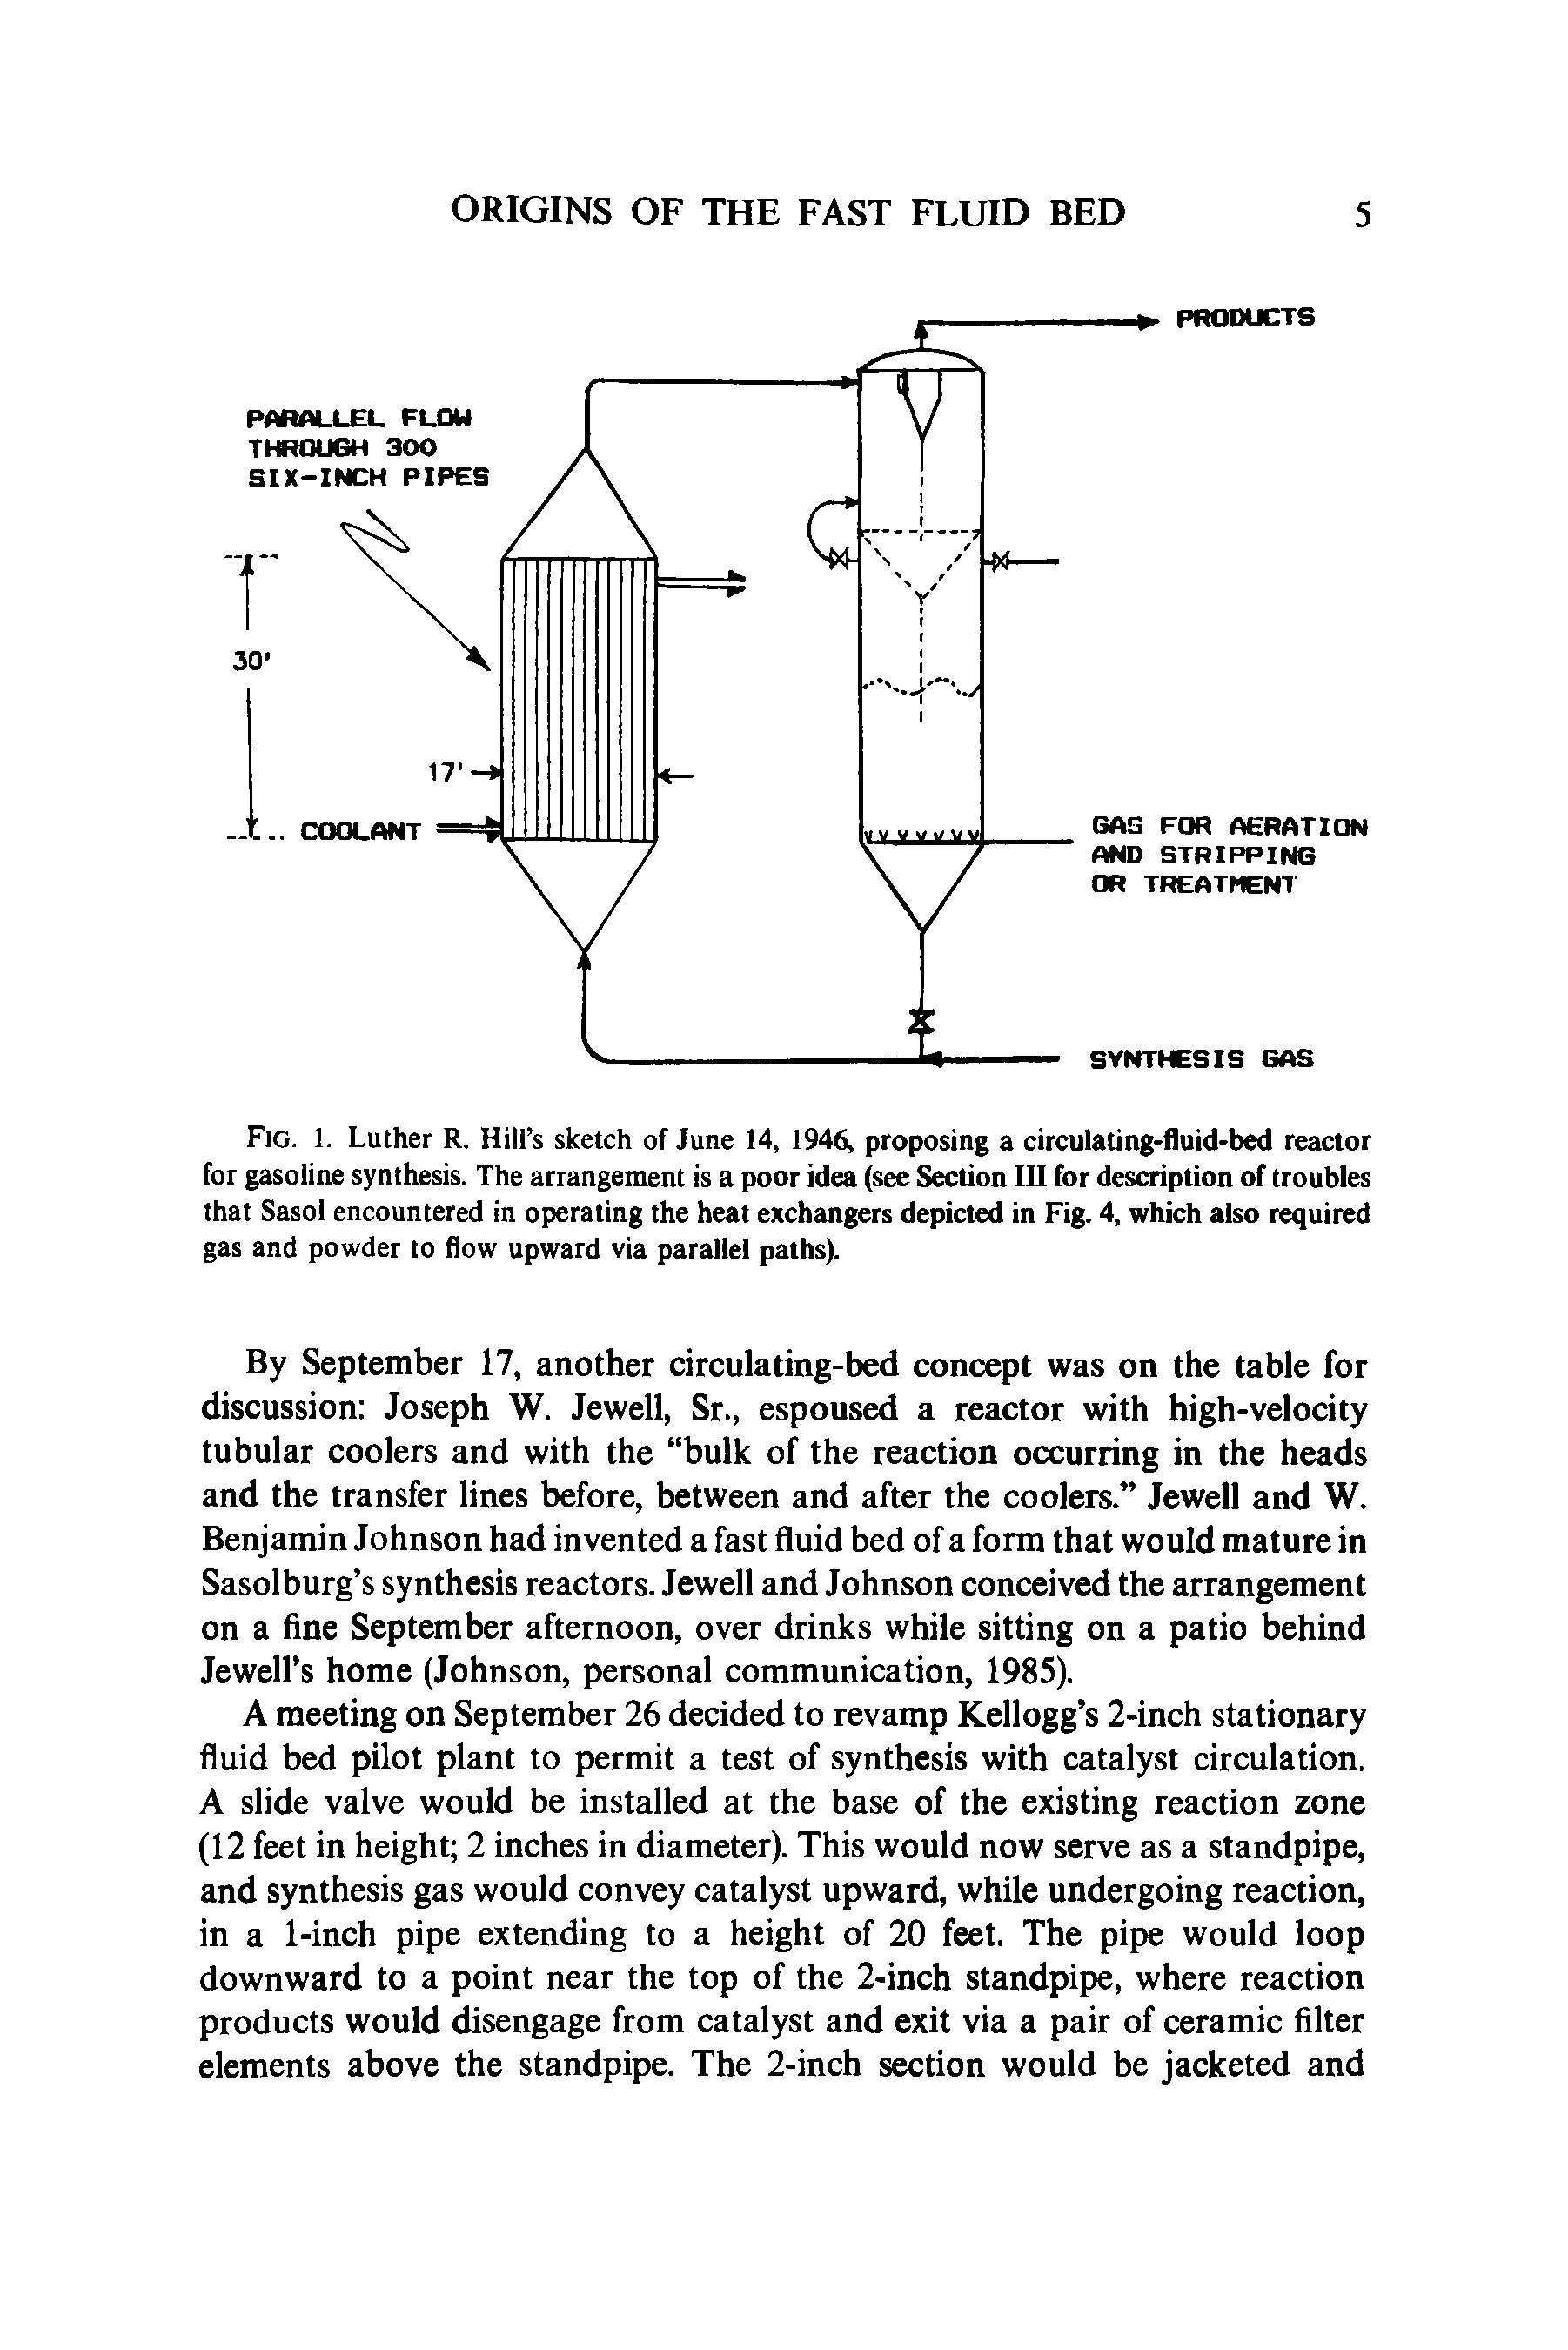 Fig. 1. Luther R. Hill s sketch of June 14, 1946, proposing a circulating-fluid-bed reactor for gasoline synthesis. The arrangement is a poor idea (see Section III for description of troubles that Sasol encountered in operating the heat exchangers depicted in Fig. 4, which also required gas and powder to flow upward via parallel paths).